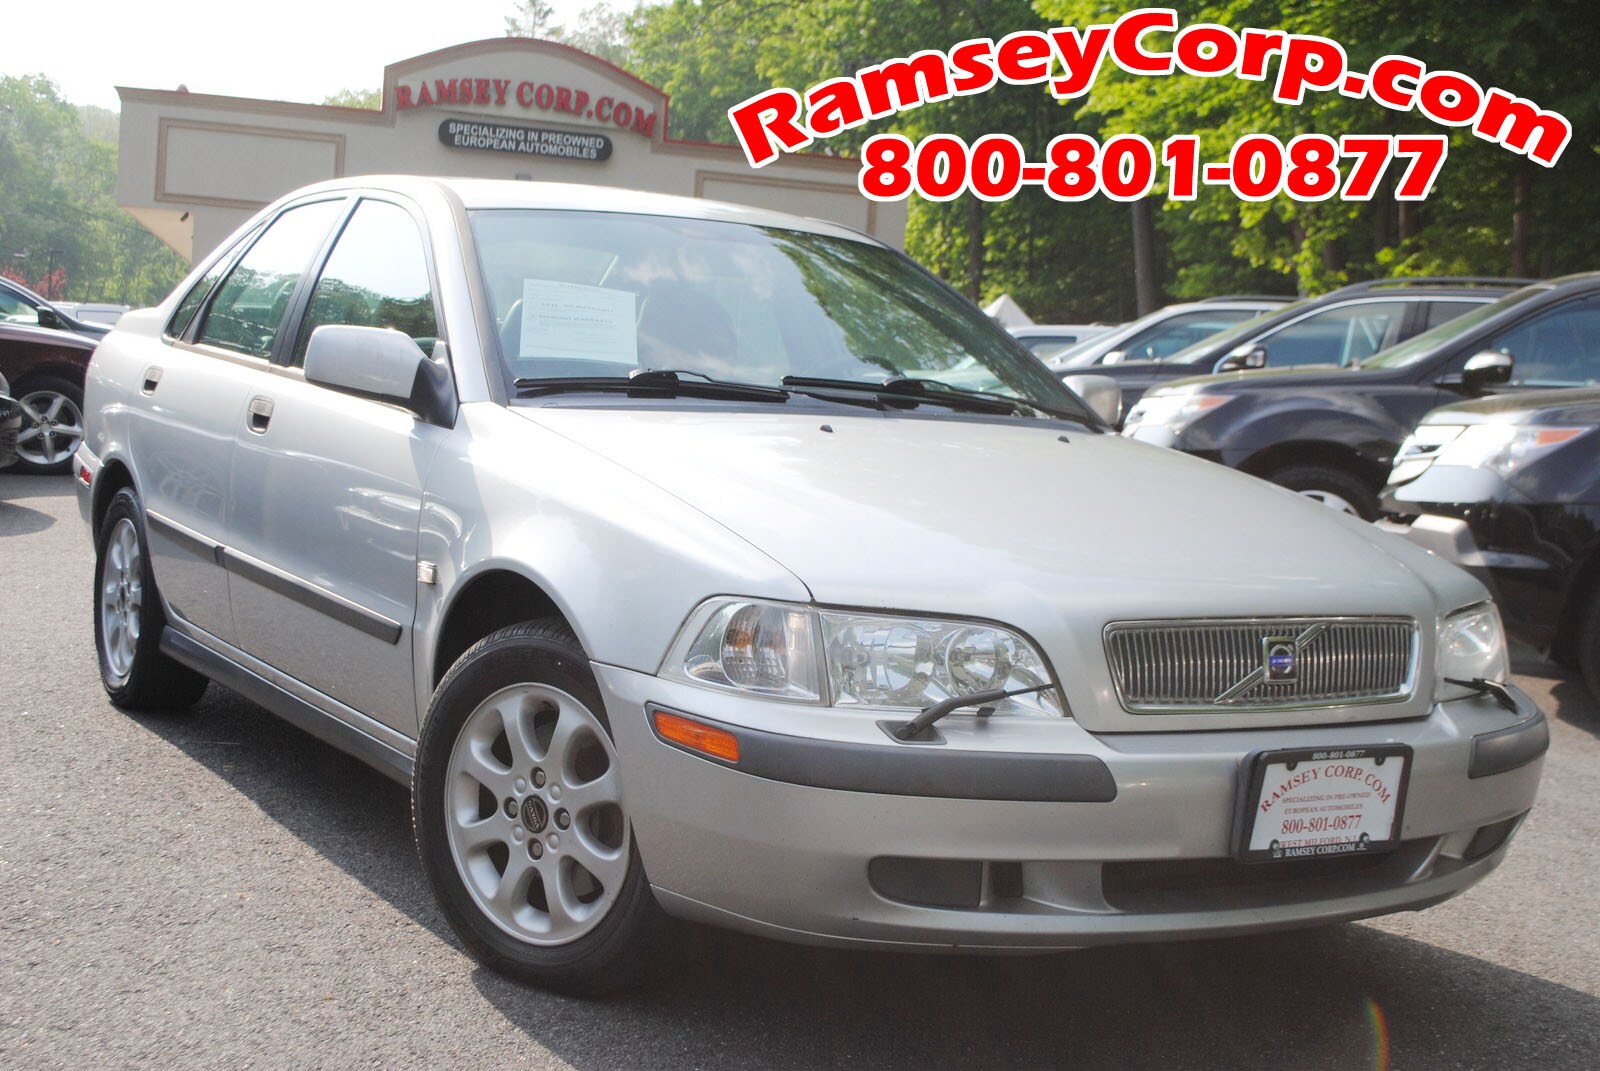 Used 2002 Volvo S40 For Sale at Ramsey Corp. | VIN: YV1VS29532F819993